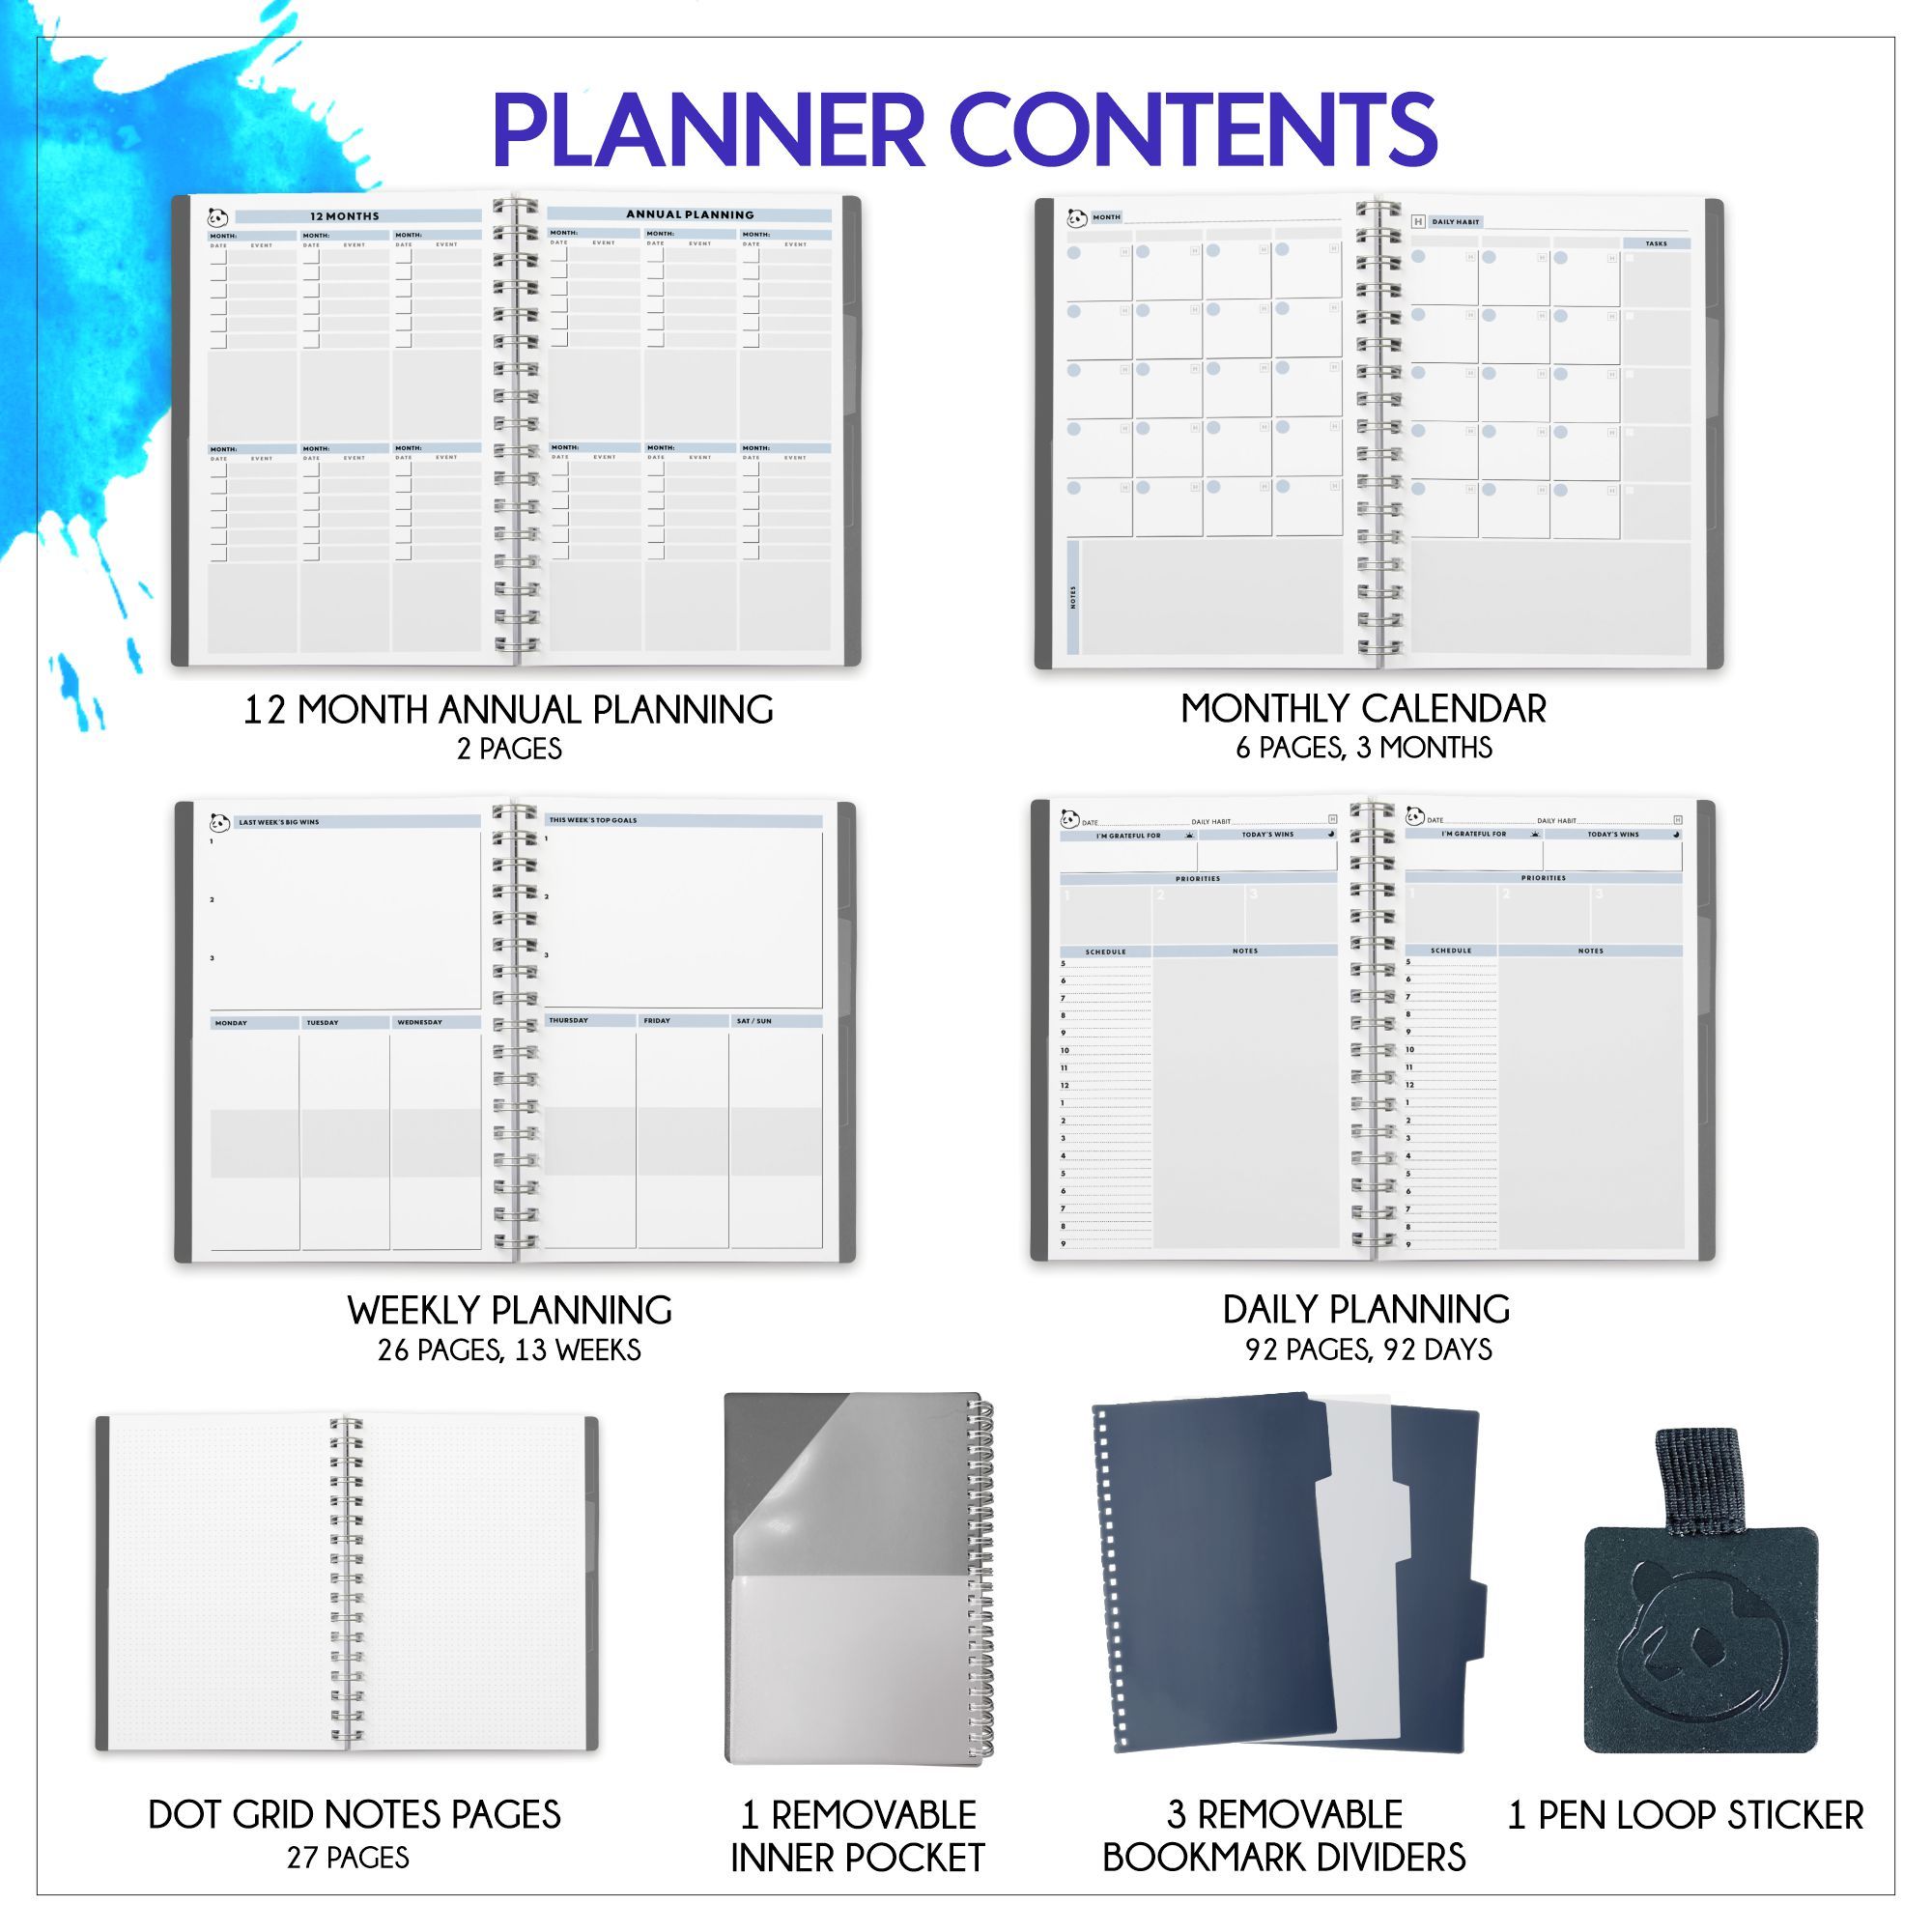 Panda Planner 2.0: Elevate Your Daily Routine with Our Advanced